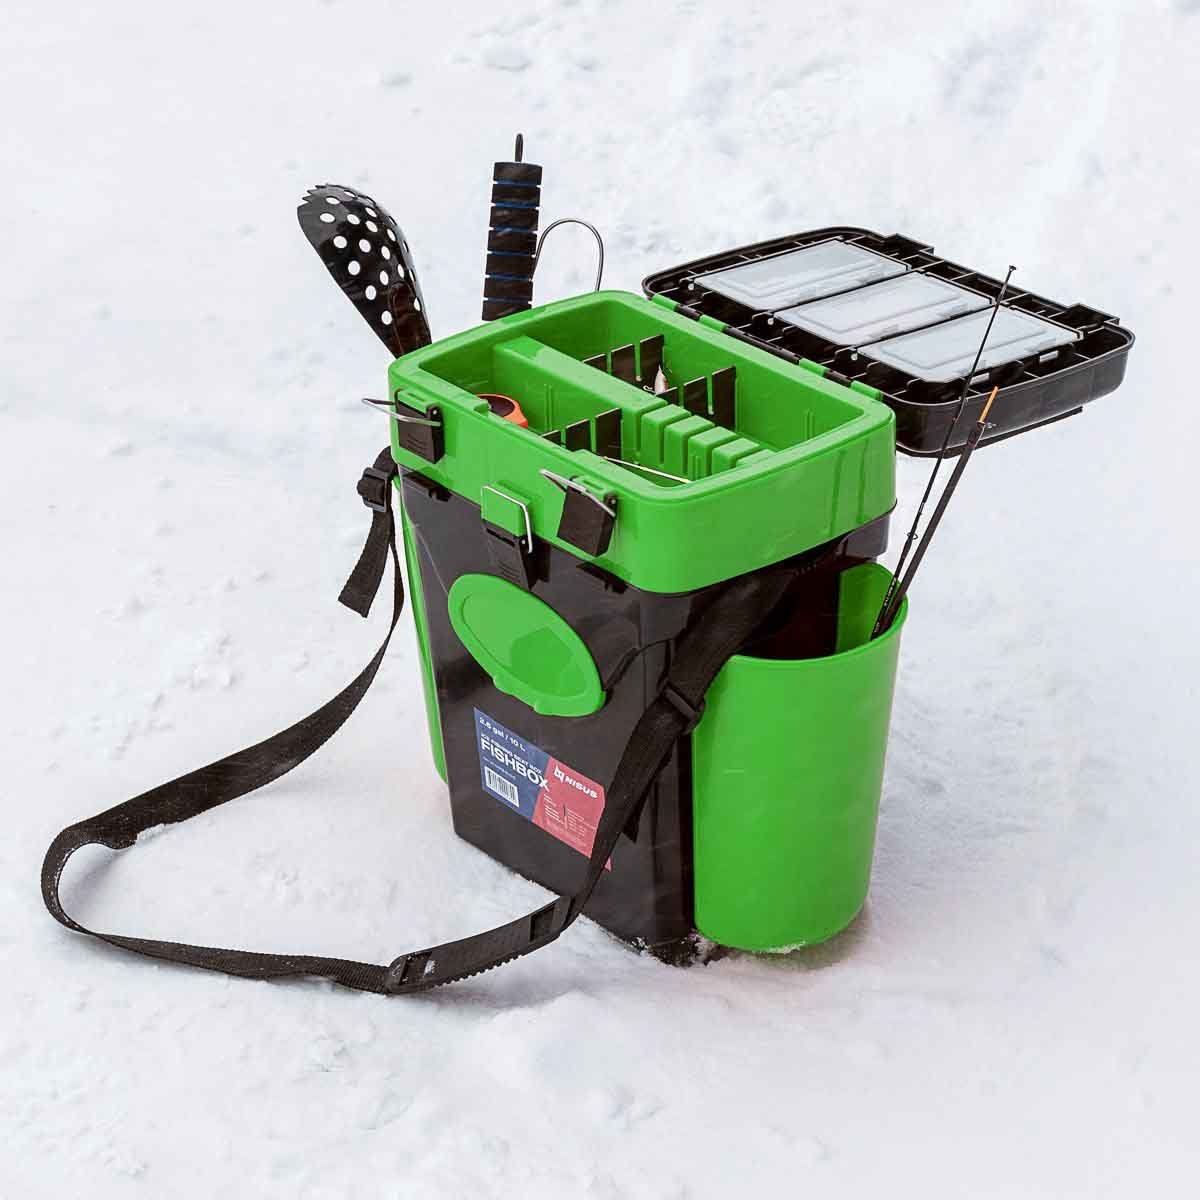 FishBox 10 liter Box for Ice Fishing could carry an ice skimmer, a rod and reel combo and other gear for ice fishing